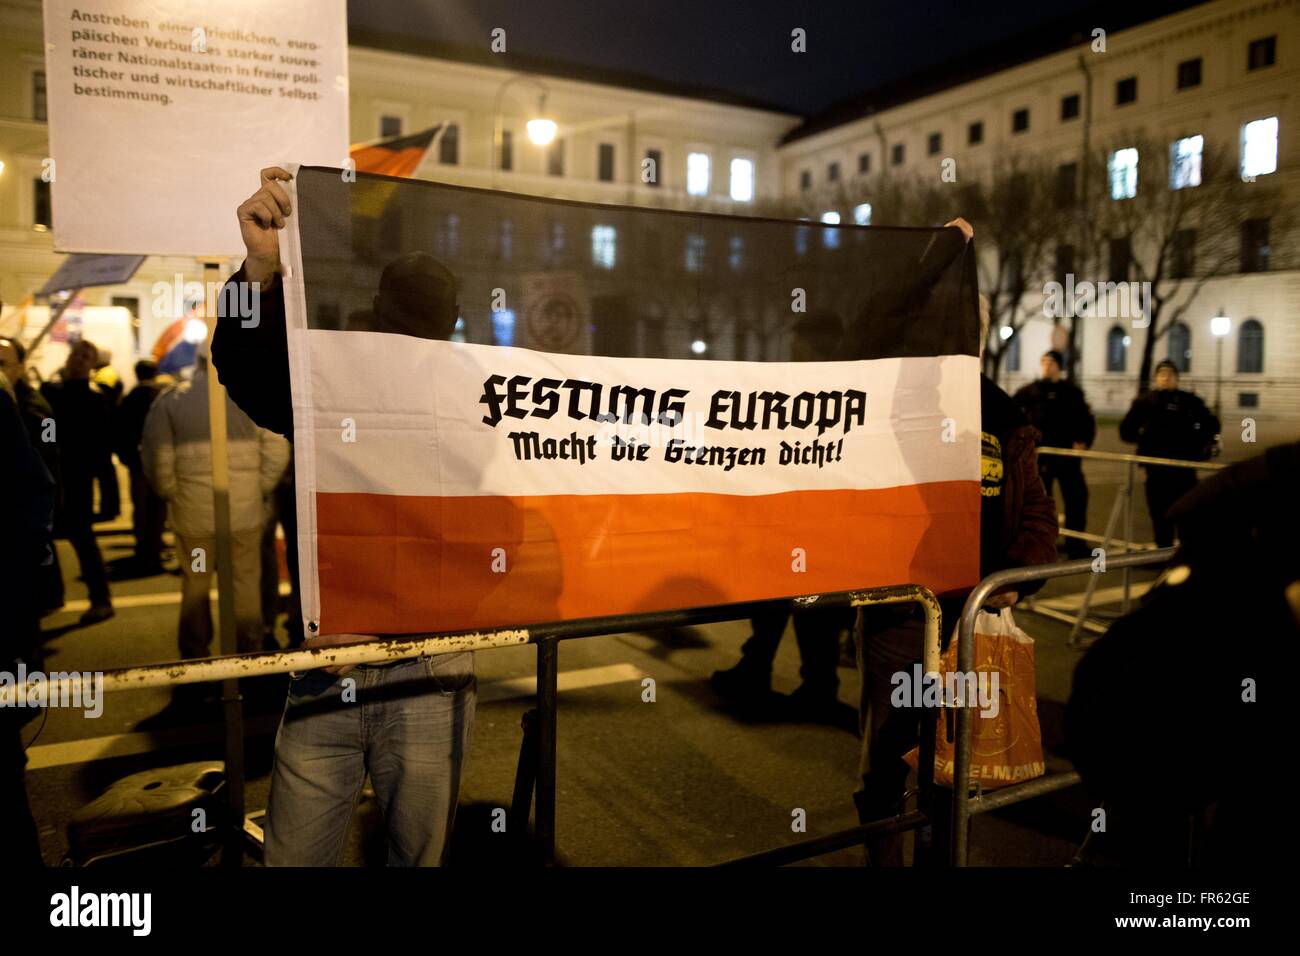 March 21, 2016 - On March 21st PEGIDA Munich invited author JÃ¼rgen ElsÃ¤sser. ElsÃ¤sser did not show up due to sickness. 300 participated in the far right demonstration. Several antifacist groups mobilized against the march. Activists formed a roadblock and forced PEGIDA to turn around. Amongst the participants of PEGIDA were members of the neo-nazi party 'Der III. Weg' carrying a own tranpsarent. © Michael Trammer/ZUMA Wire/Alamy Live News Stock Photo